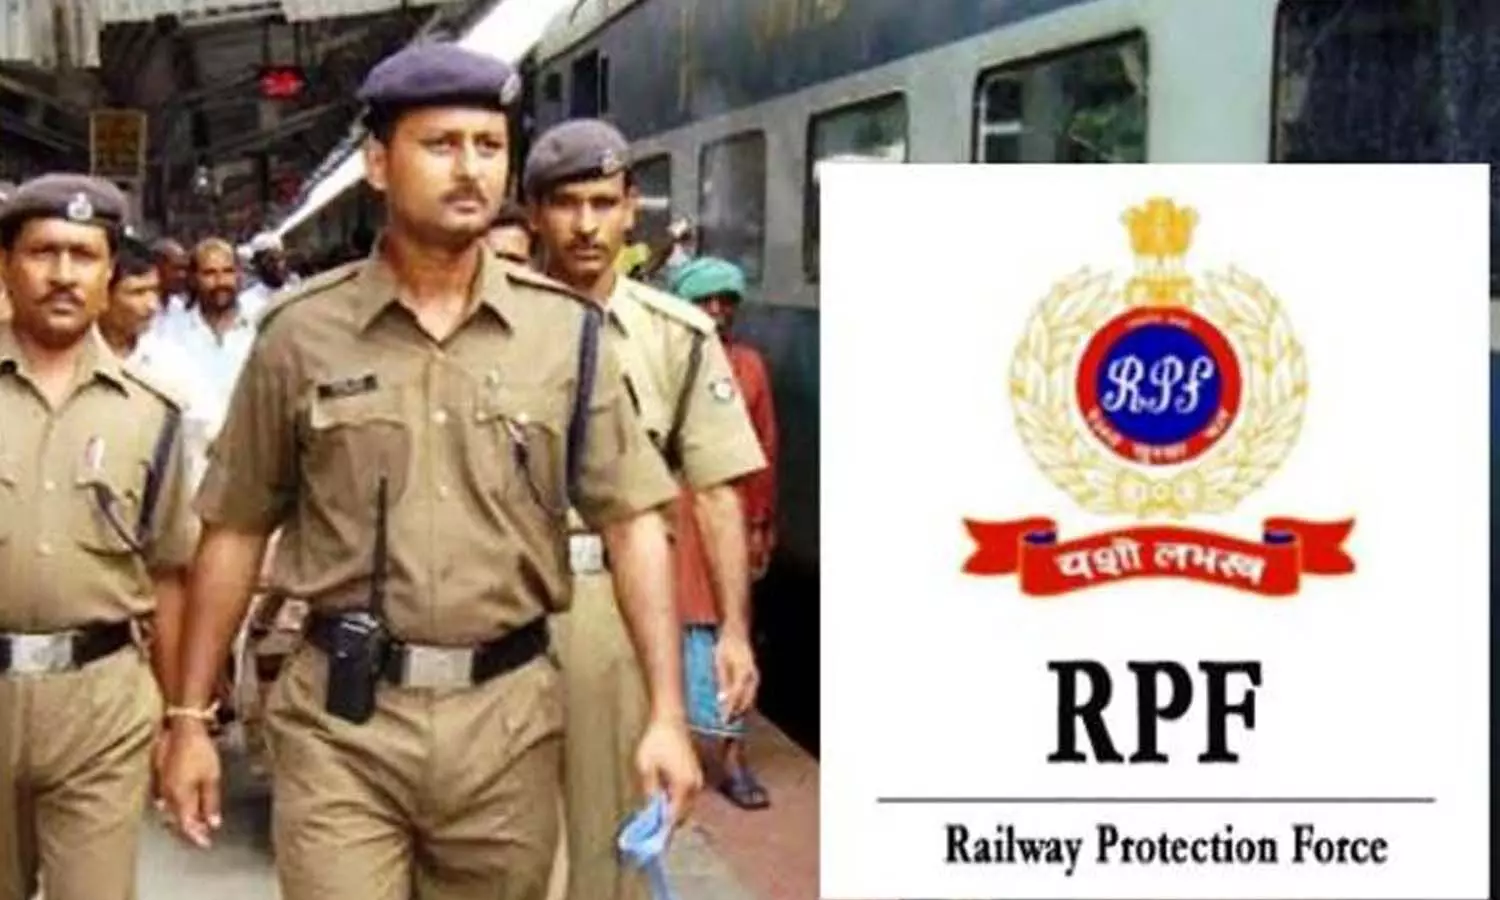 Fake RPF Inspector abducted girl in Jhansi, case filed